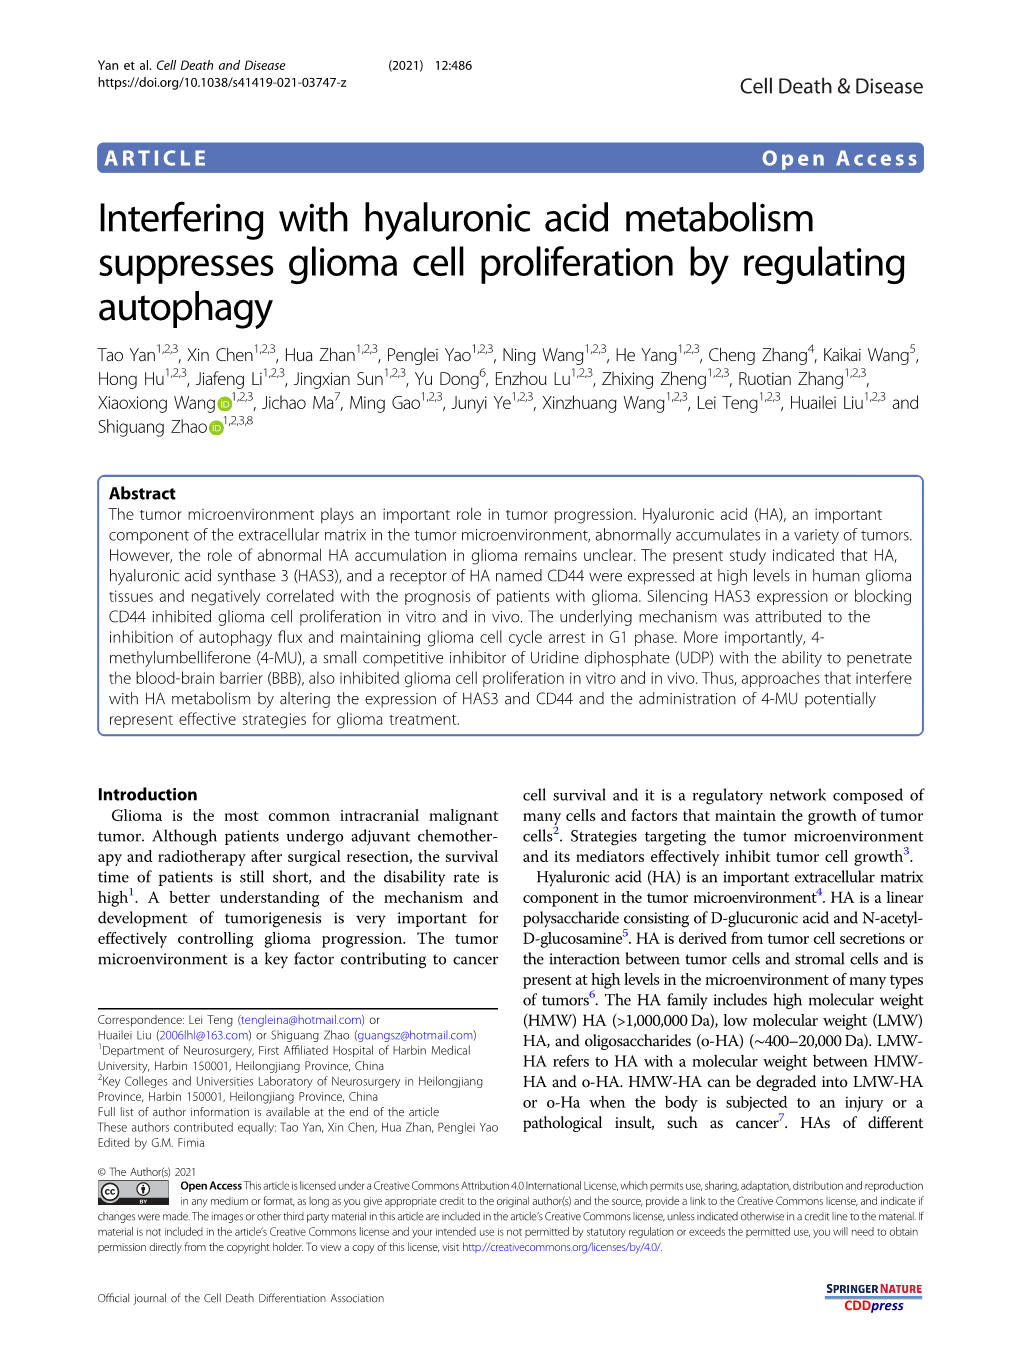 Interfering with Hyaluronic Acid Metabolism Suppresses Glioma Cell